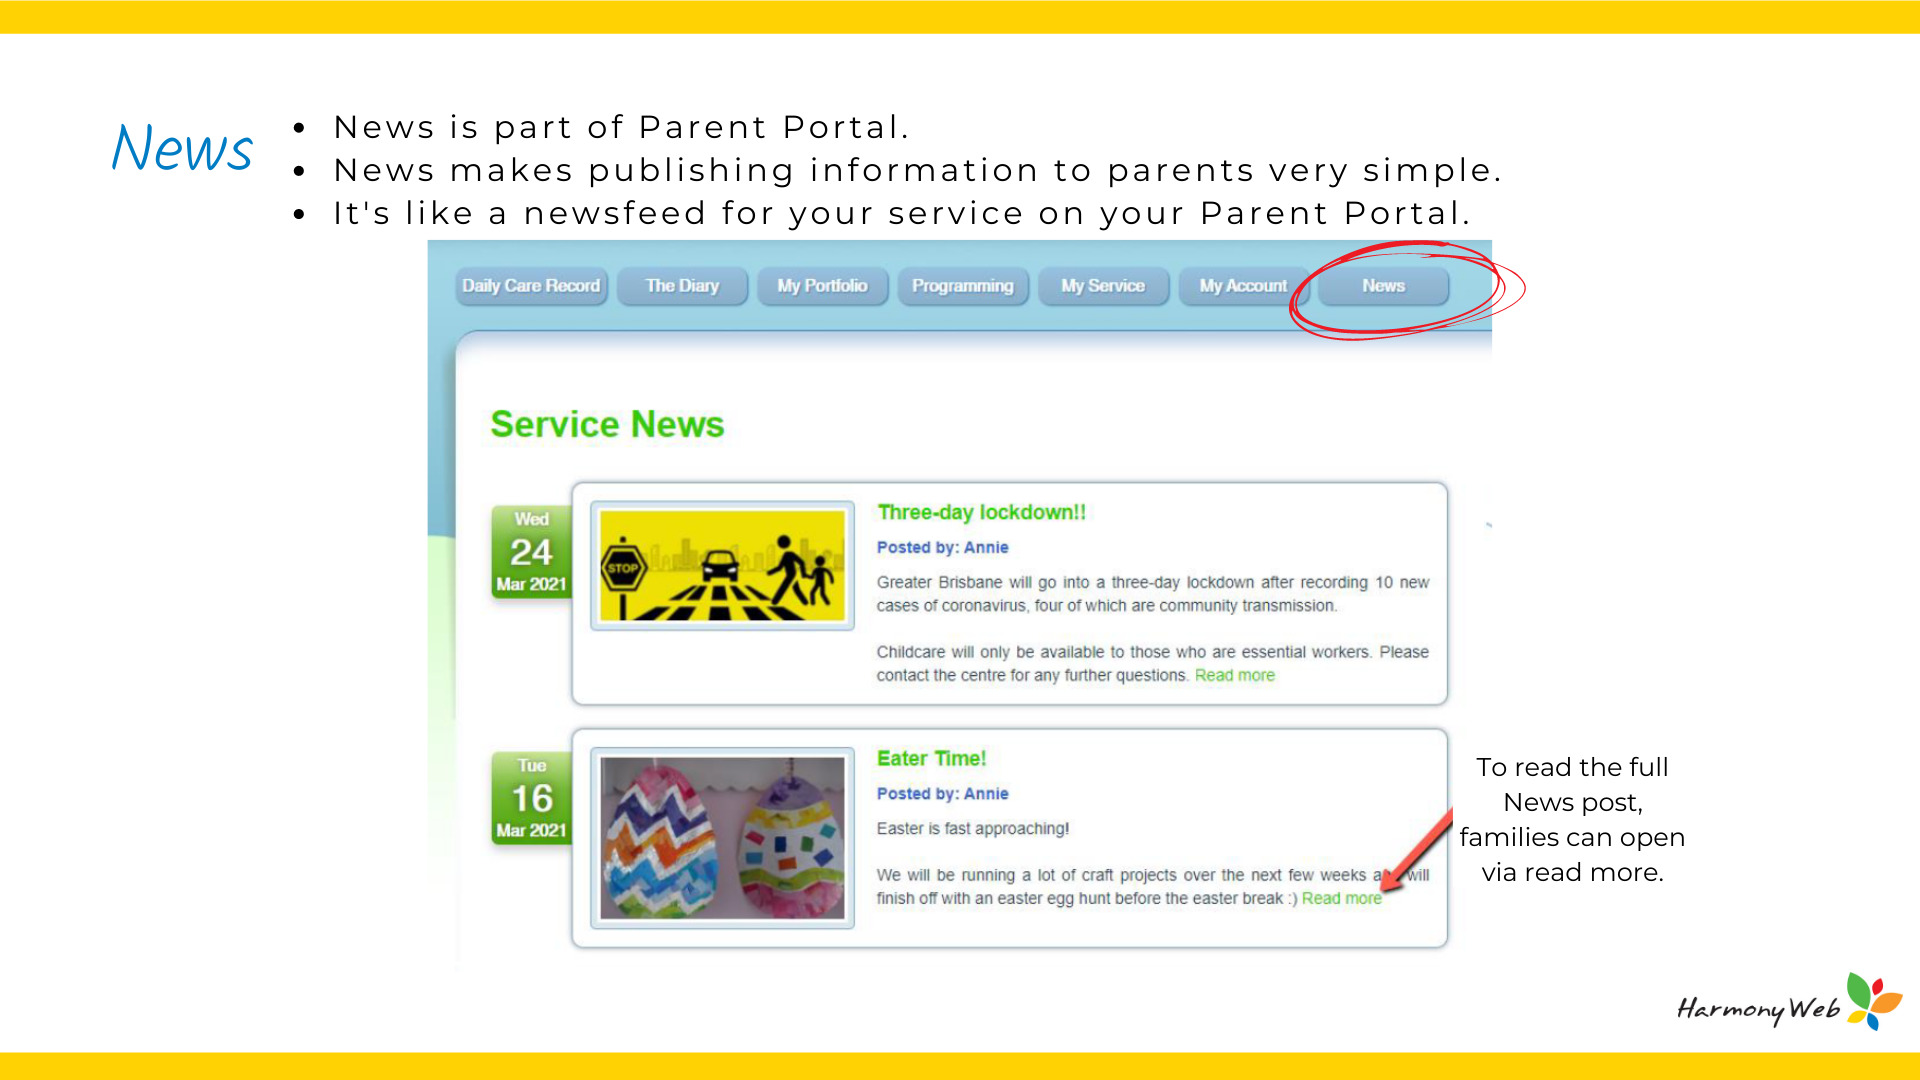 News is shared in Parent Portal